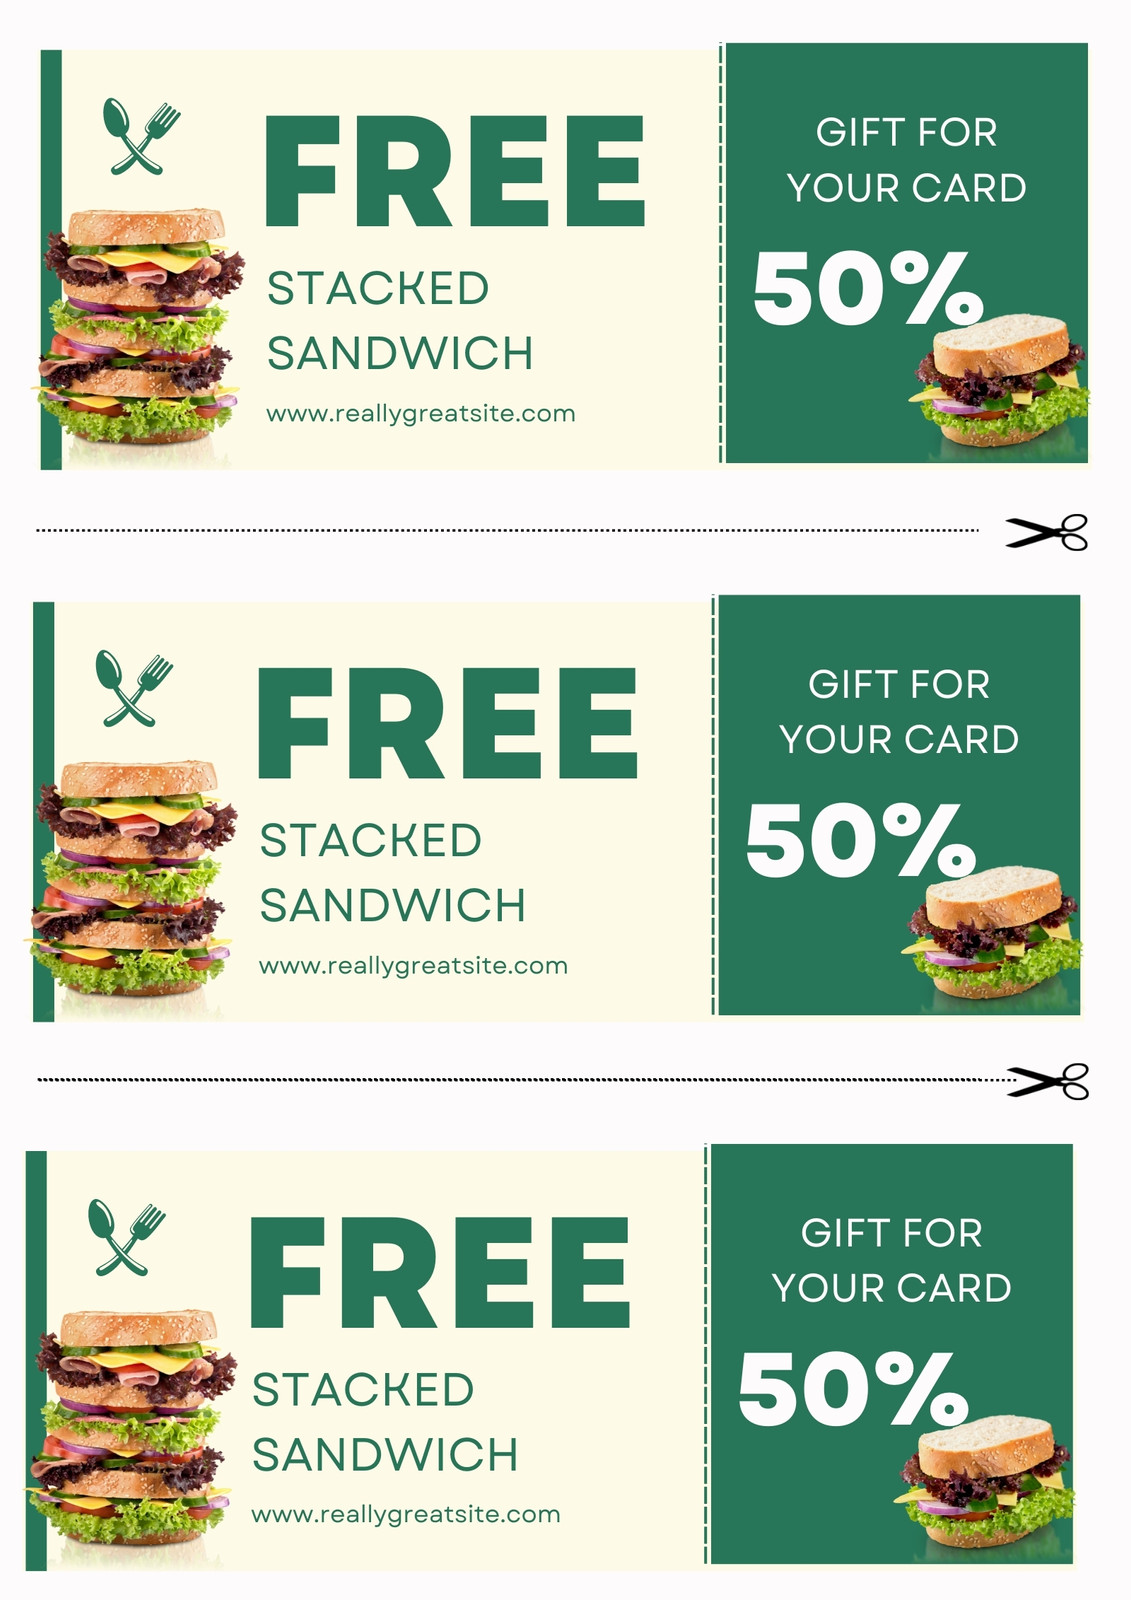 Food coupon promotions